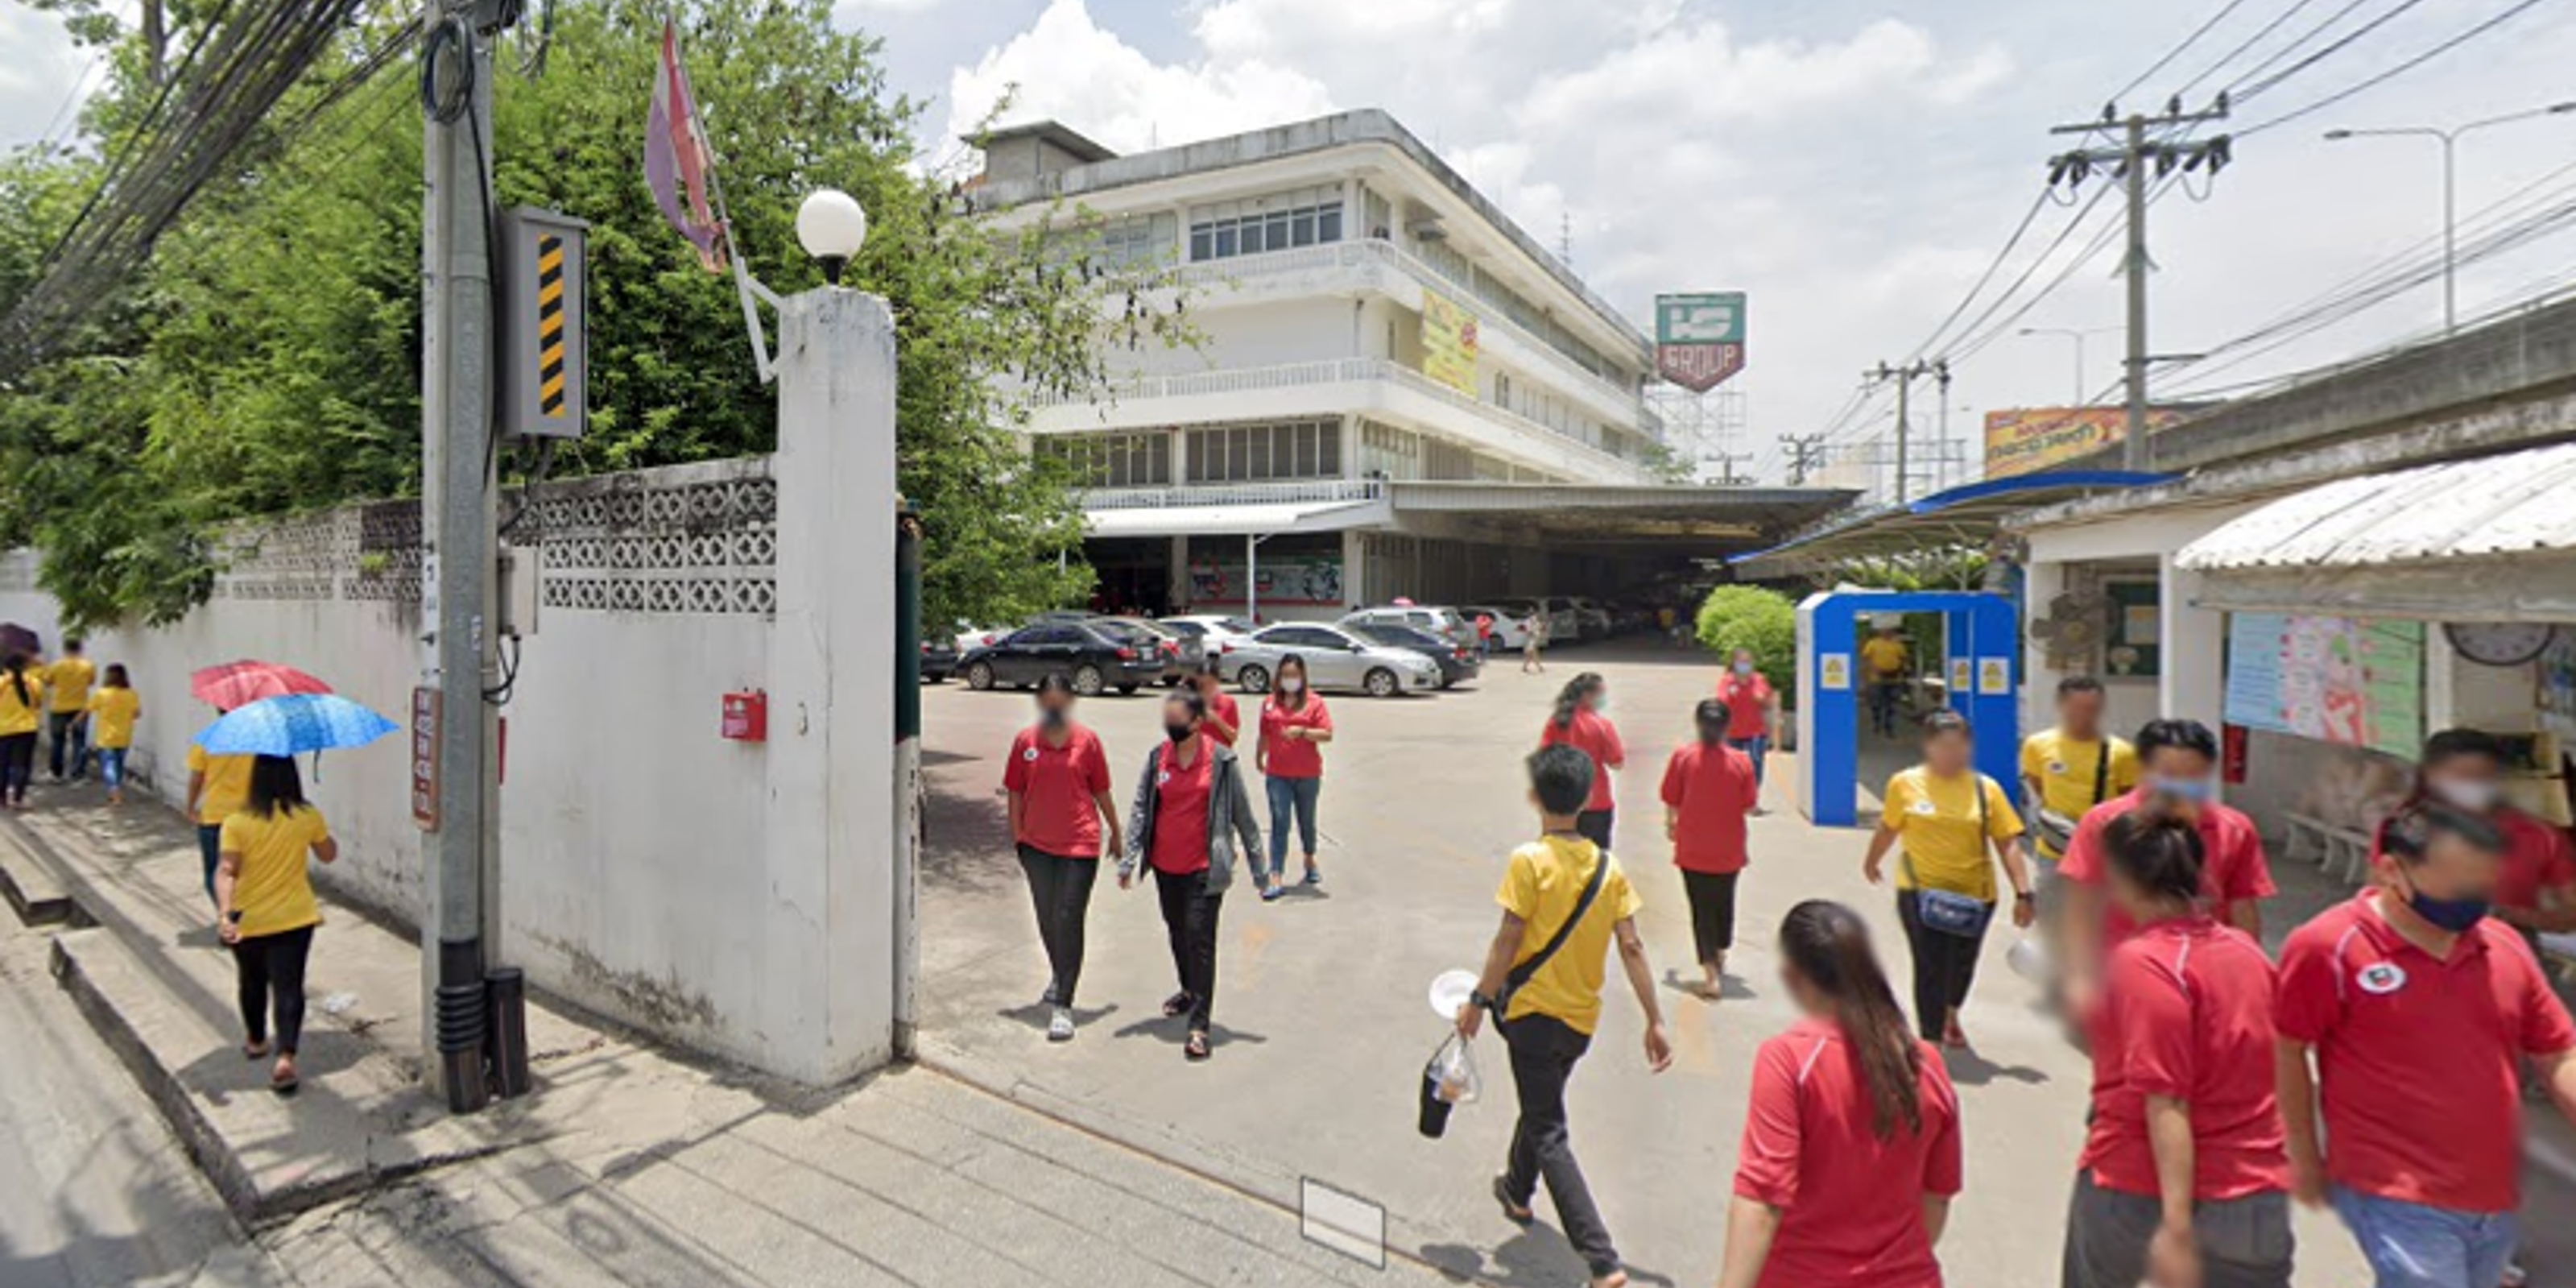 Hong Seng factory with workers entering and exiting the campus